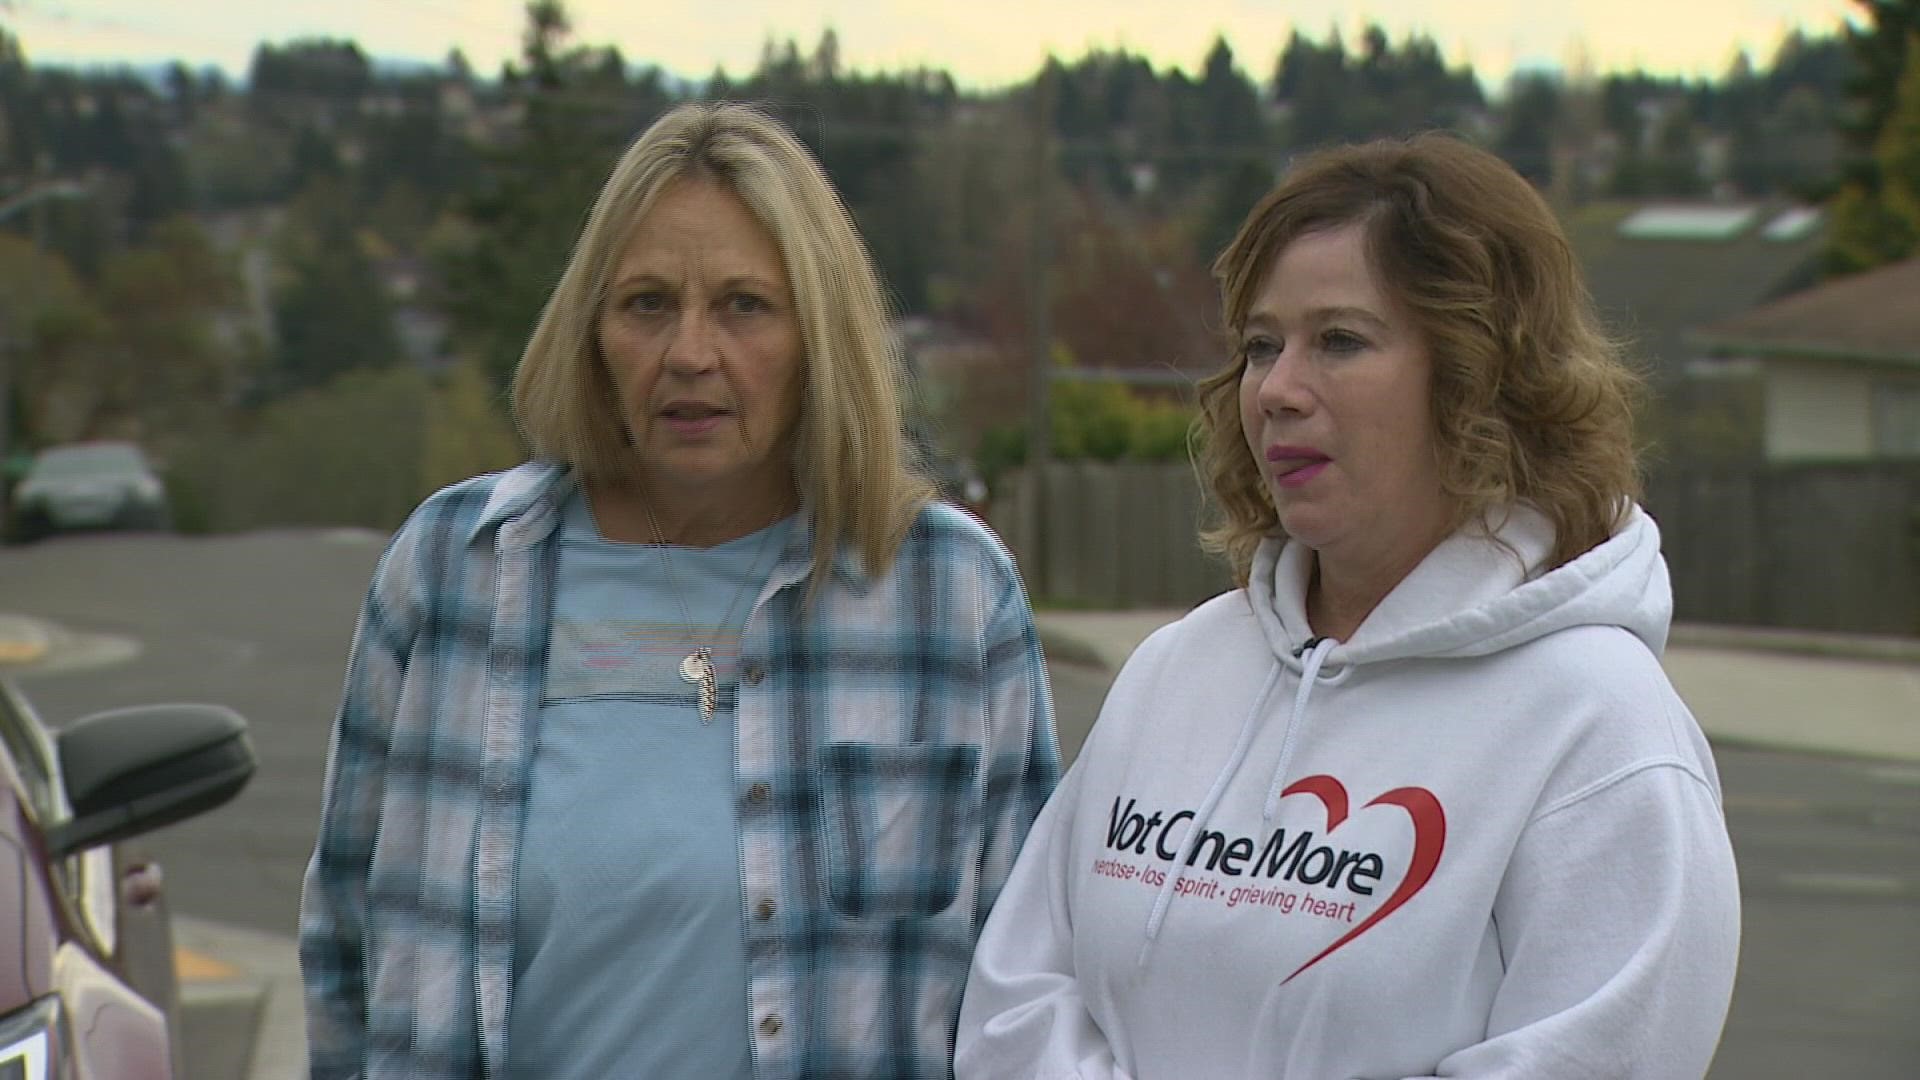 Kelli Vogel and Kim Chilcott of 'Not One More' Seattle share perspective on on reducing stigma and finding support.